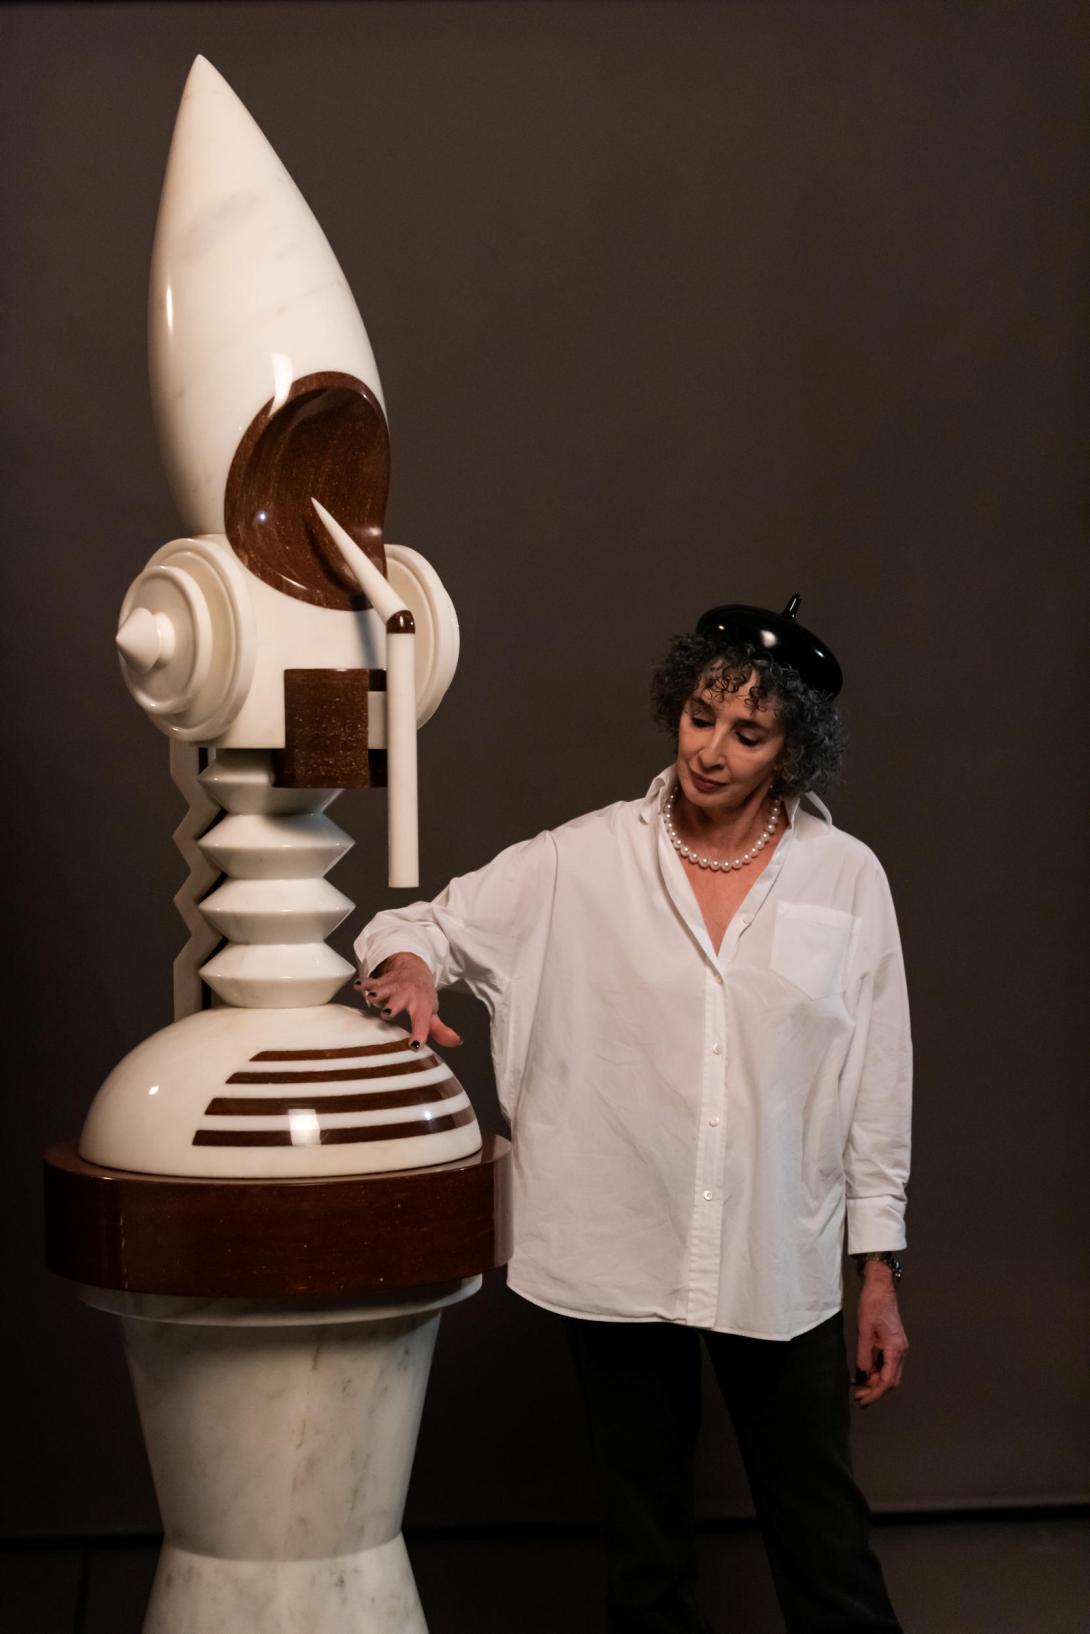 A woman wearing a white button-down shirt and a sculptural, shiny beret runs her hand over a larger-than-life marble statue, which takes the form of a modernist totem.